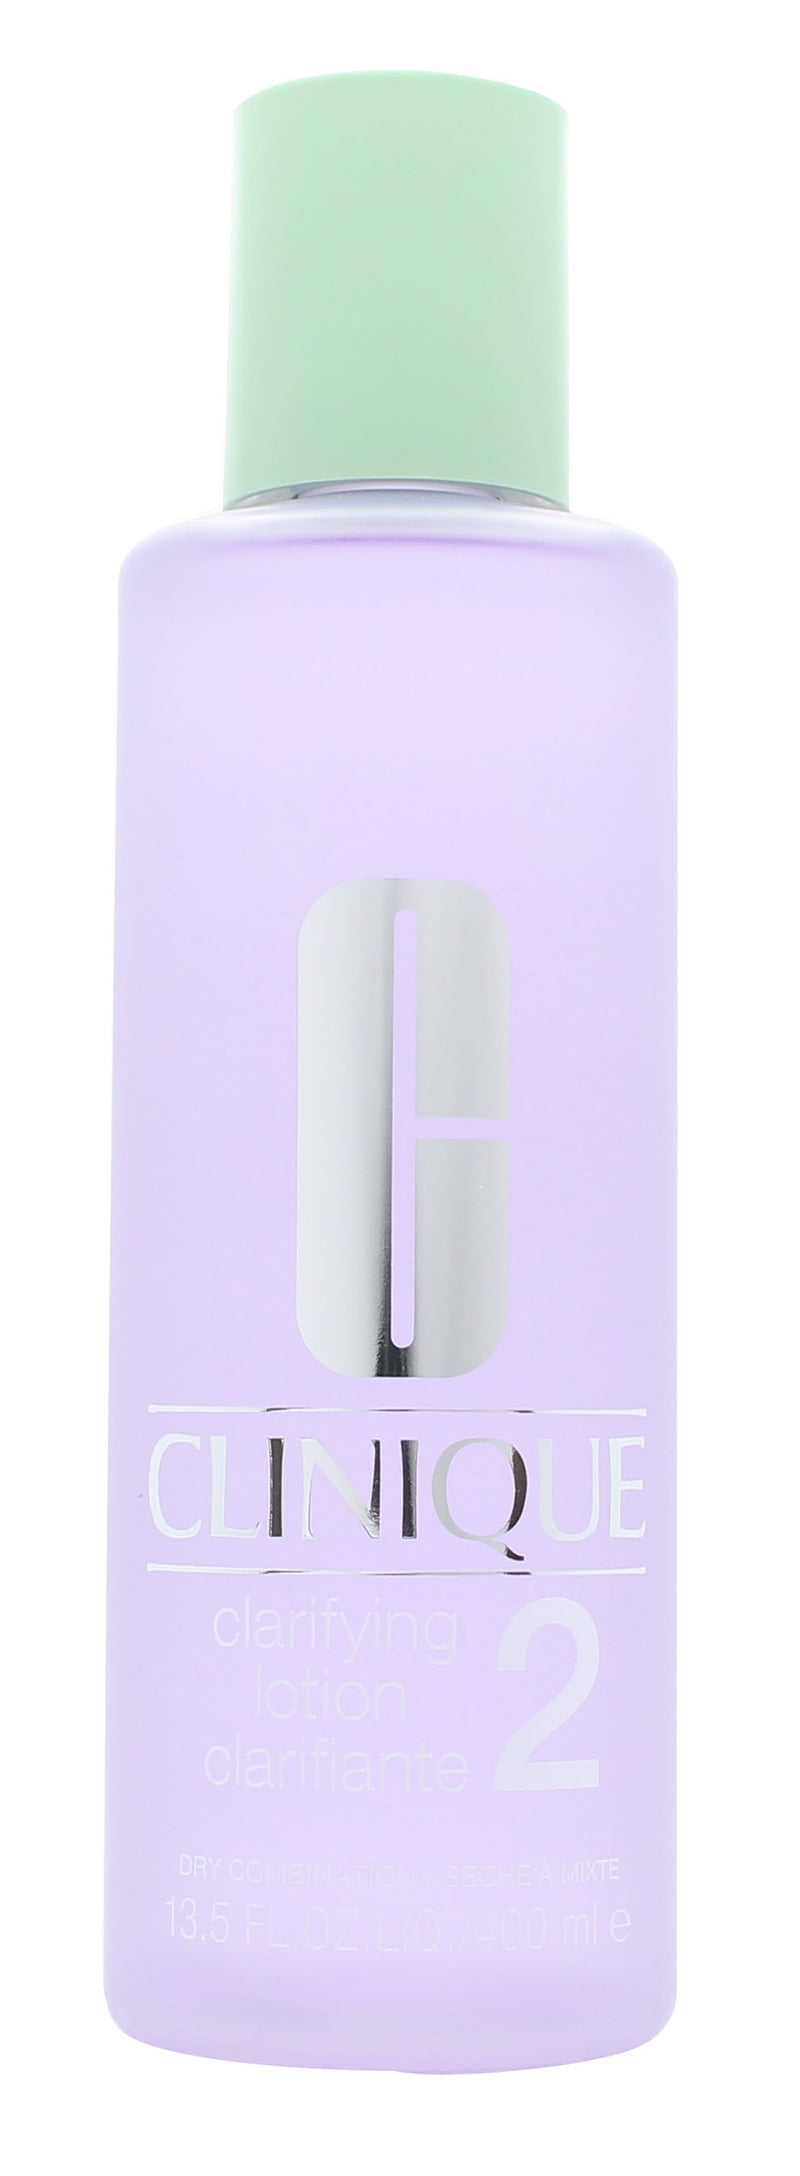 Clinique Cleansing Range Face Lotion 400ml 2 - Dry Combination